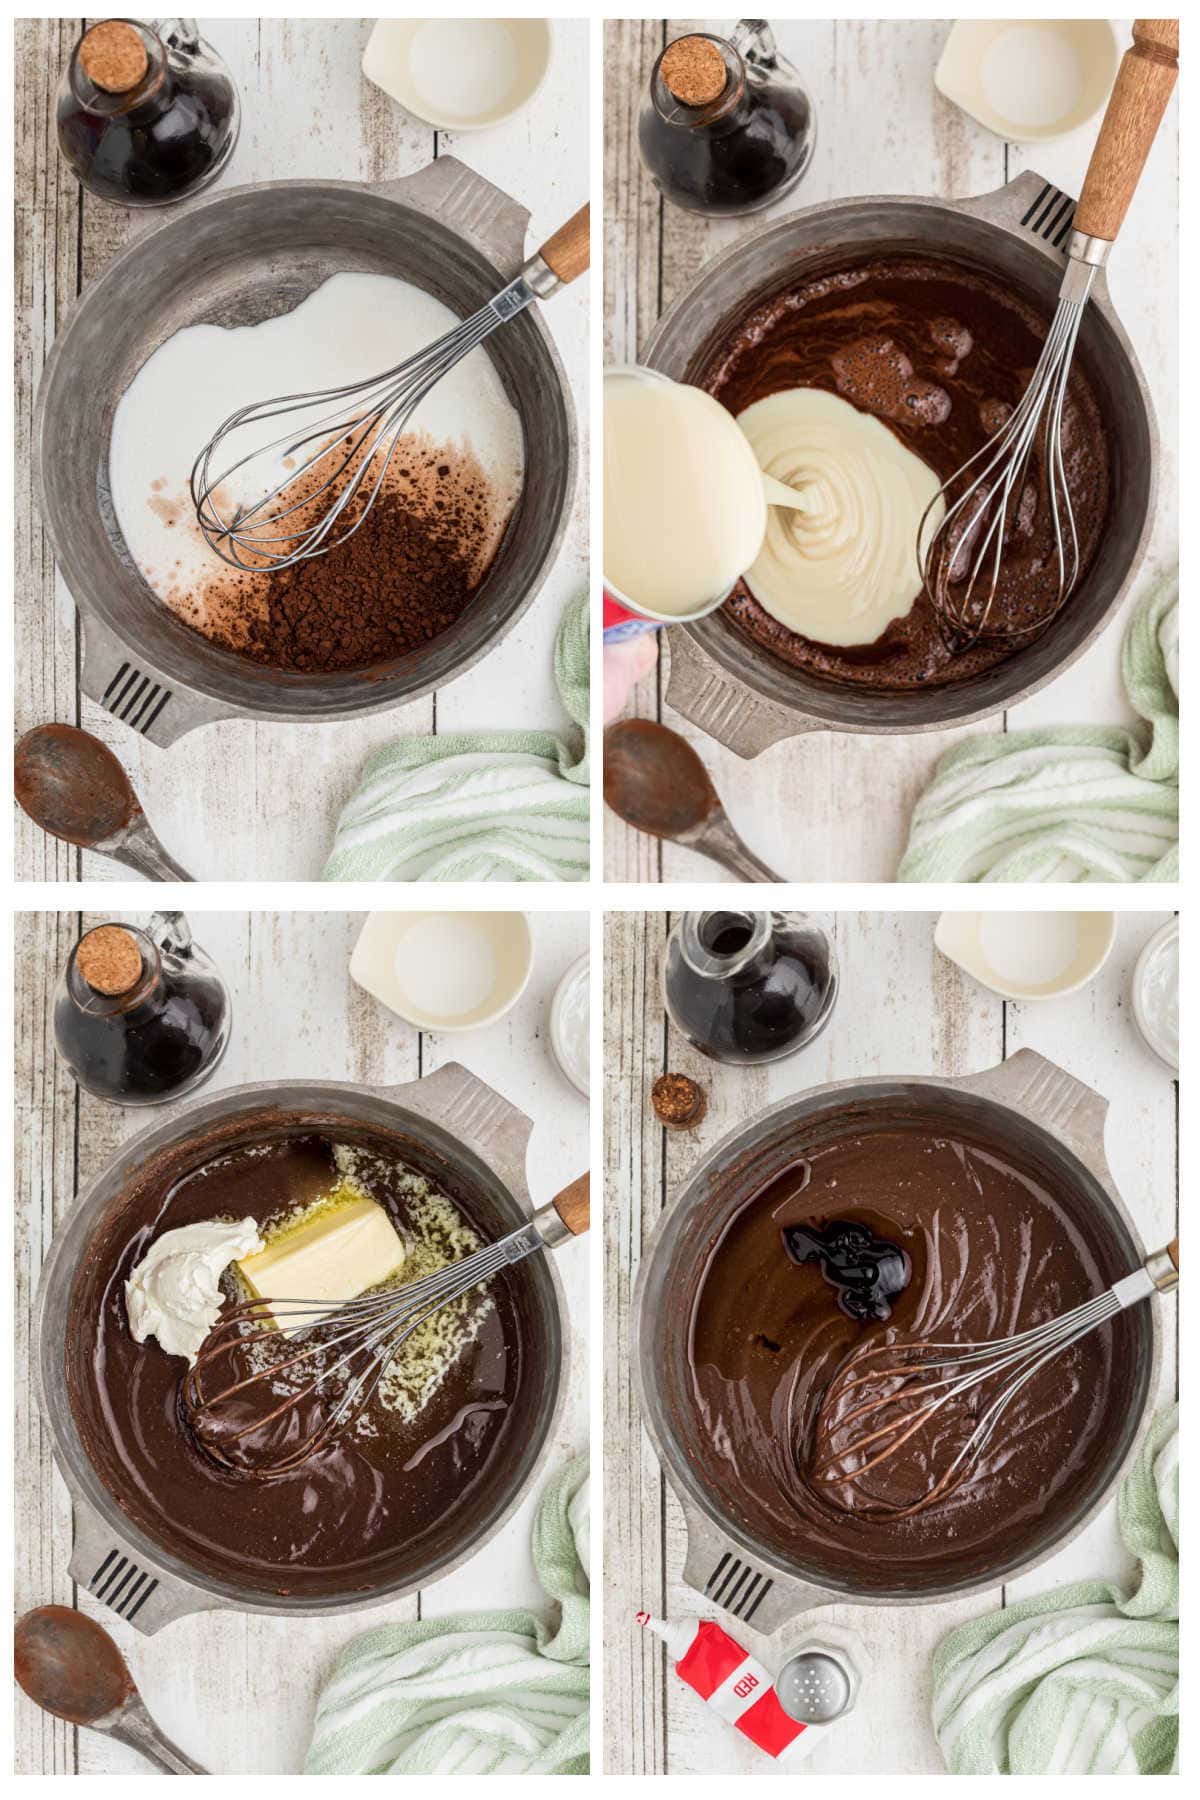 Step by step images showing how to make red velvet hot fudge sauce.